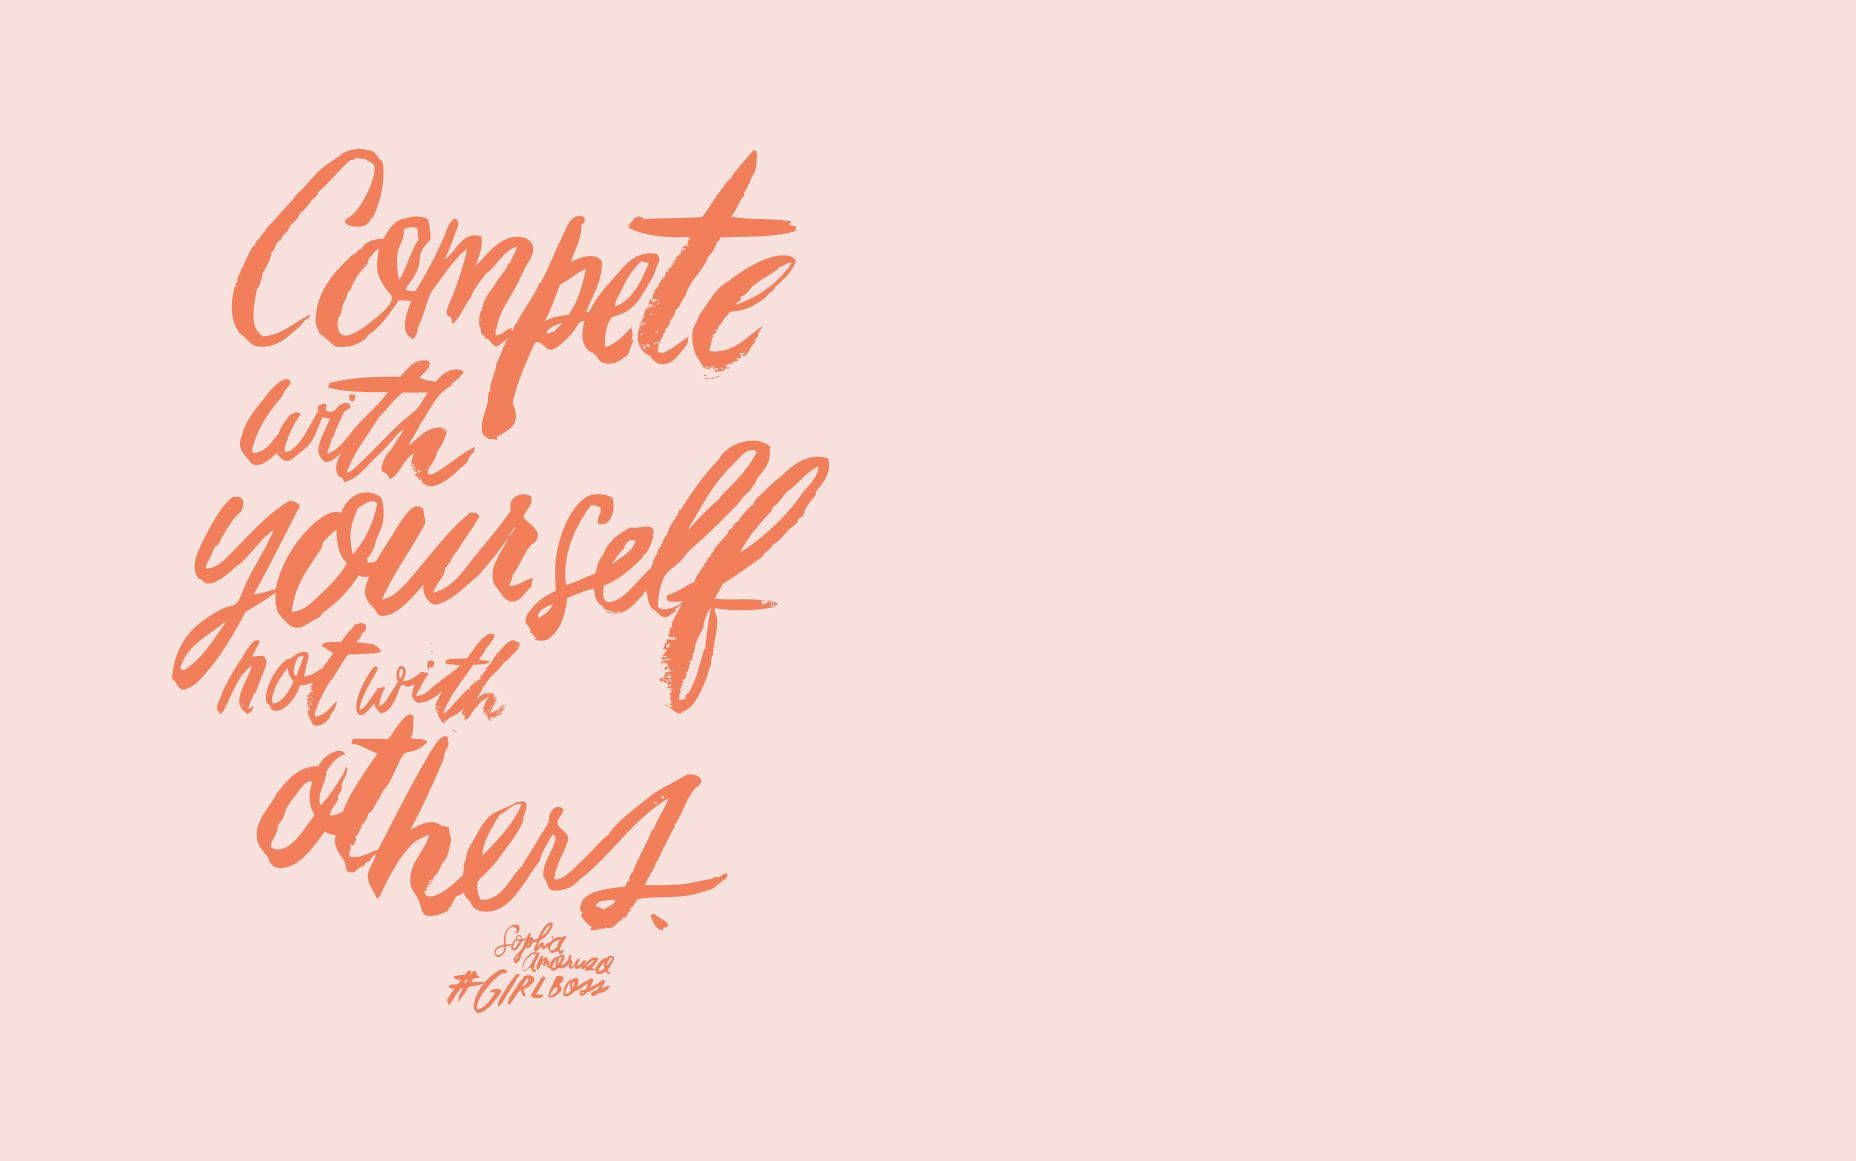 A quote that says complete with yourself and others - IMac